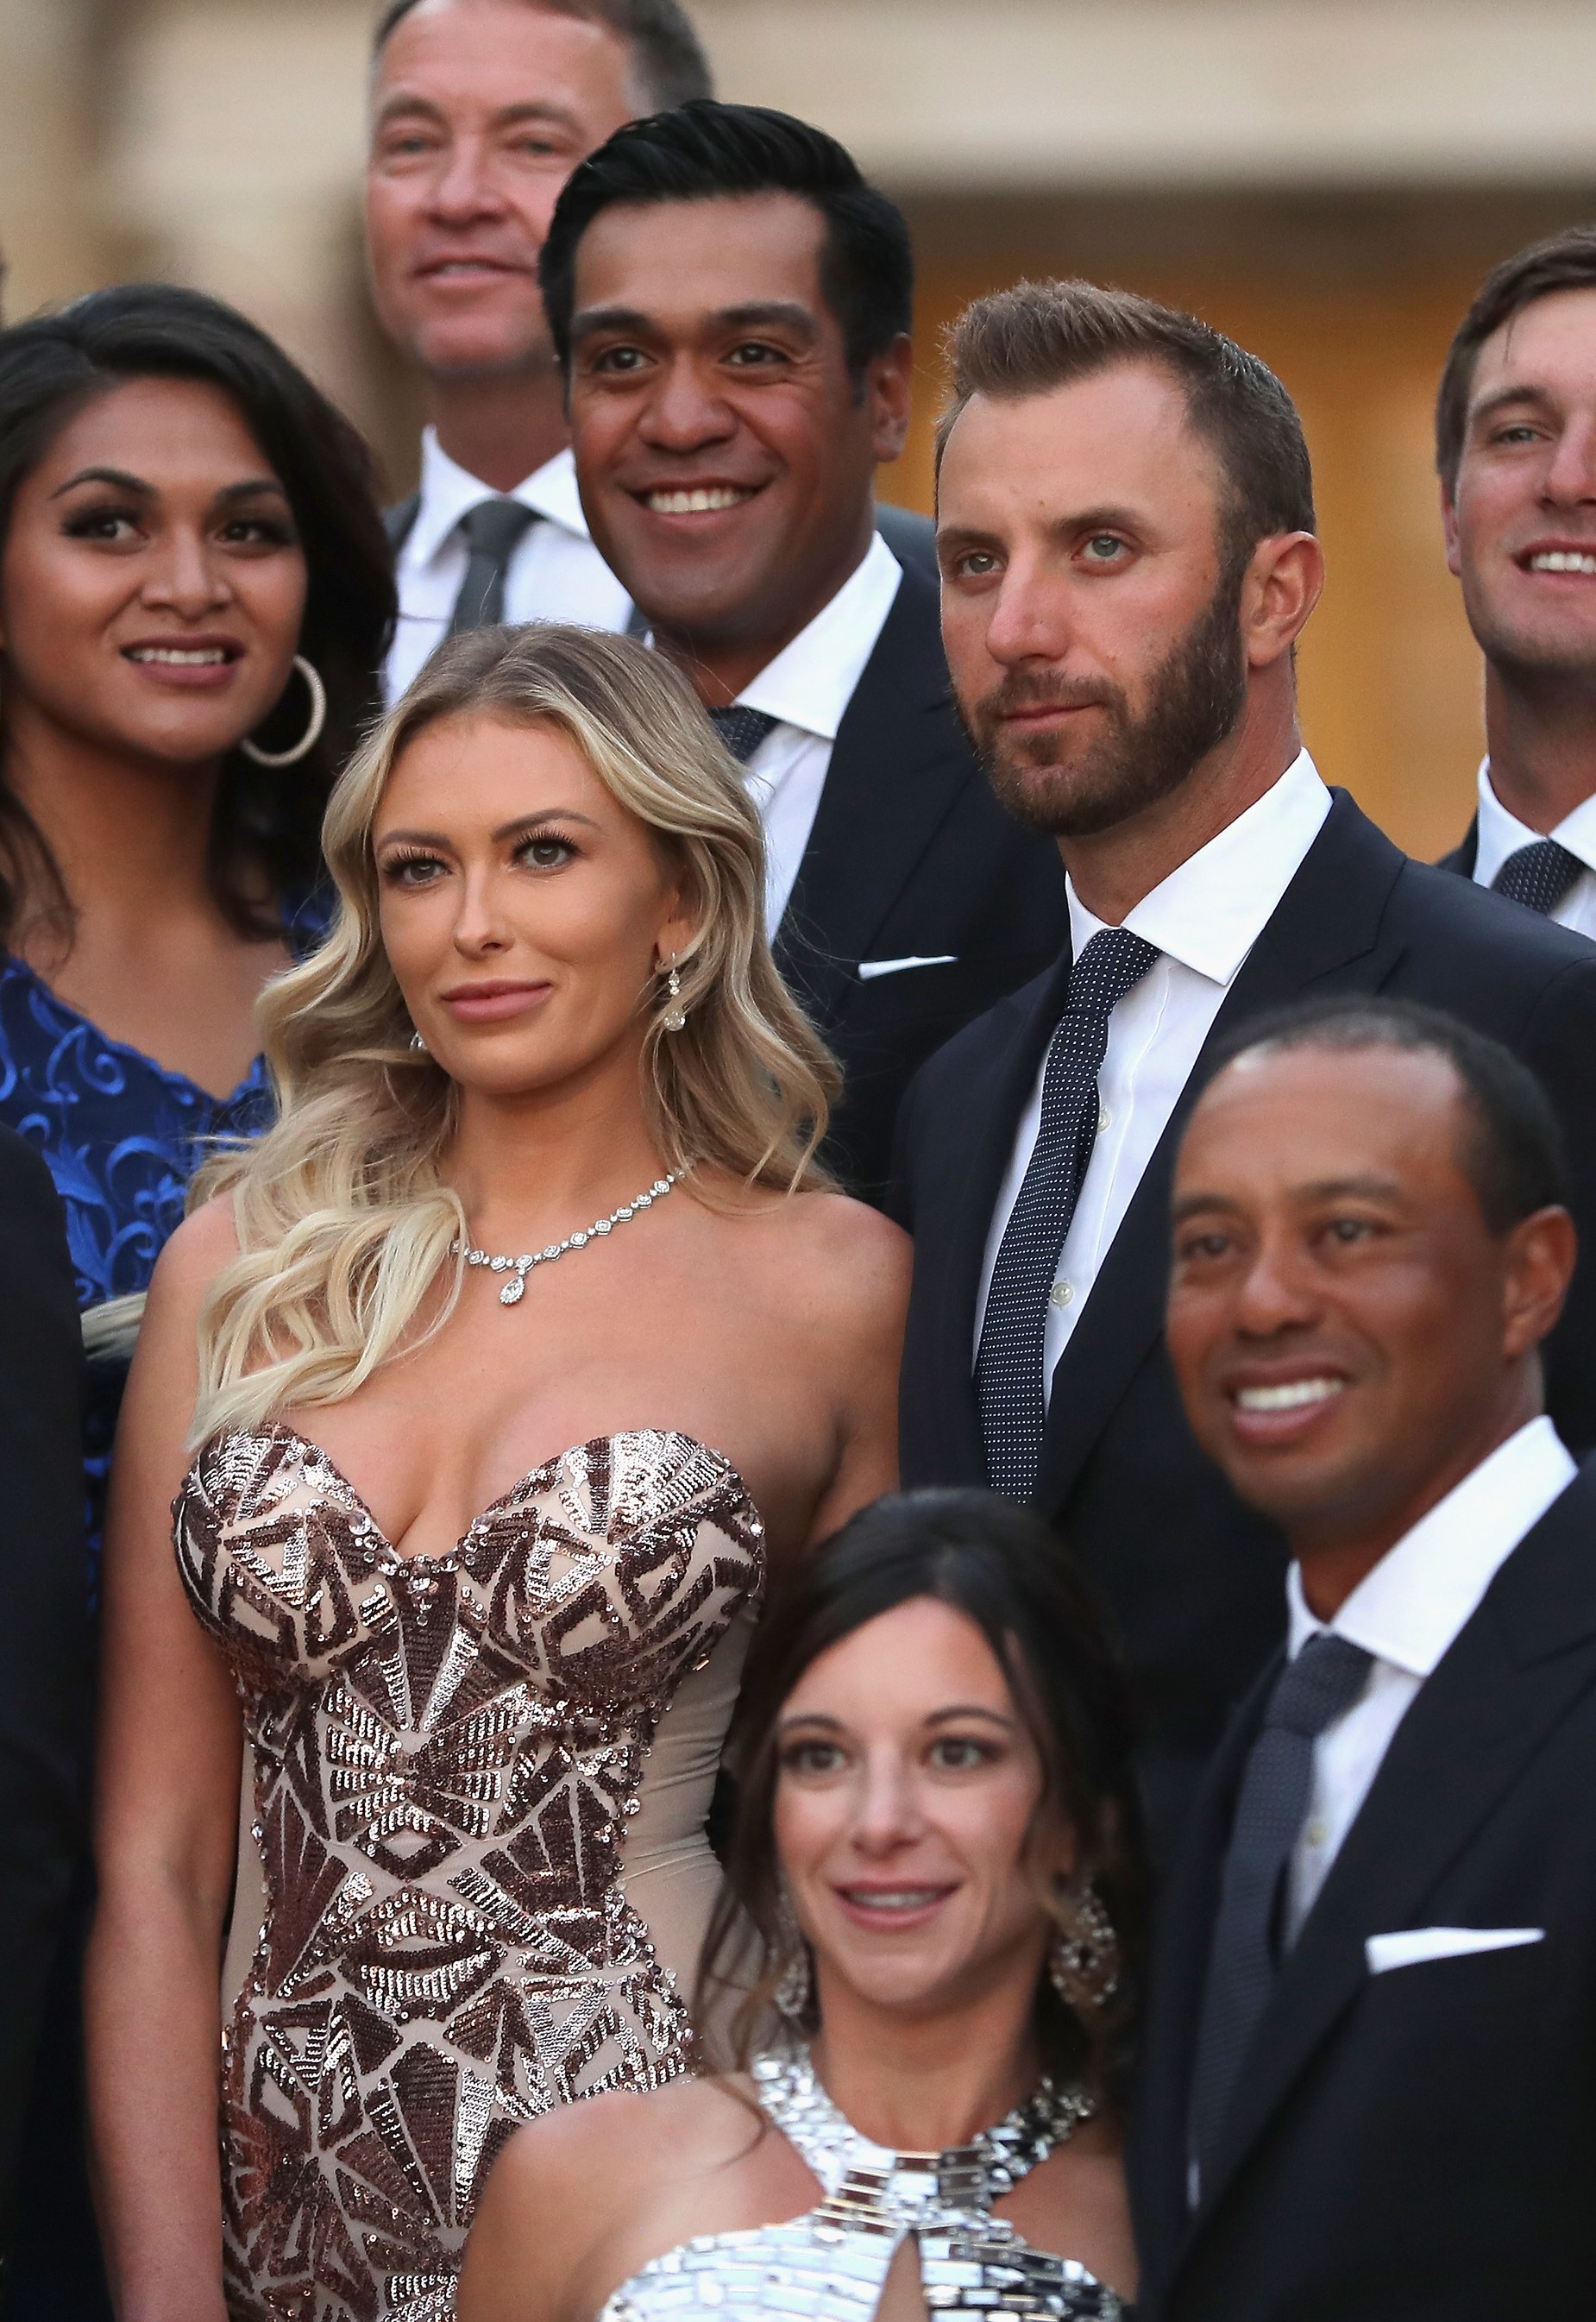 Photos Ryder Cup WAGs enjoy their big night out